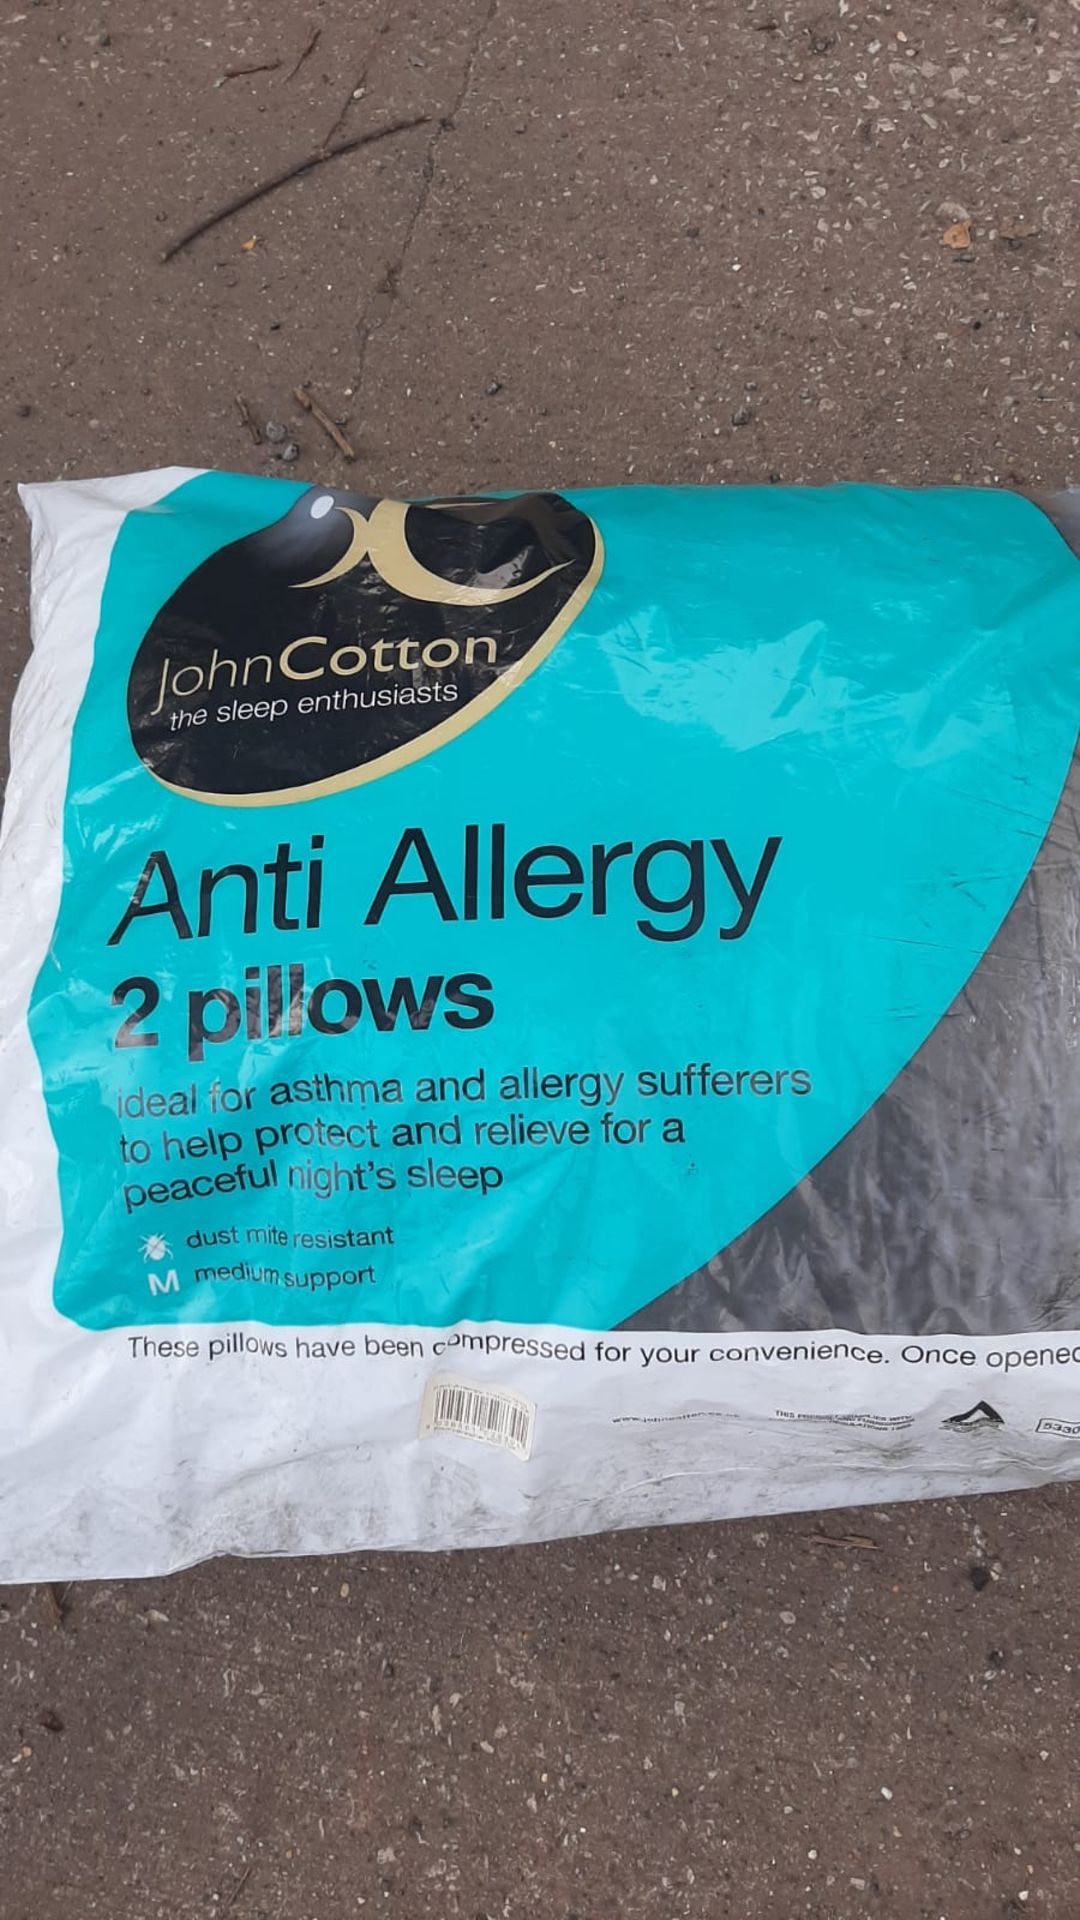 20 X NEW JOHN COTTON TWIN PACK PILLOWS, RRP £5.99 PER PACK *NO VAT* - Image 3 of 3